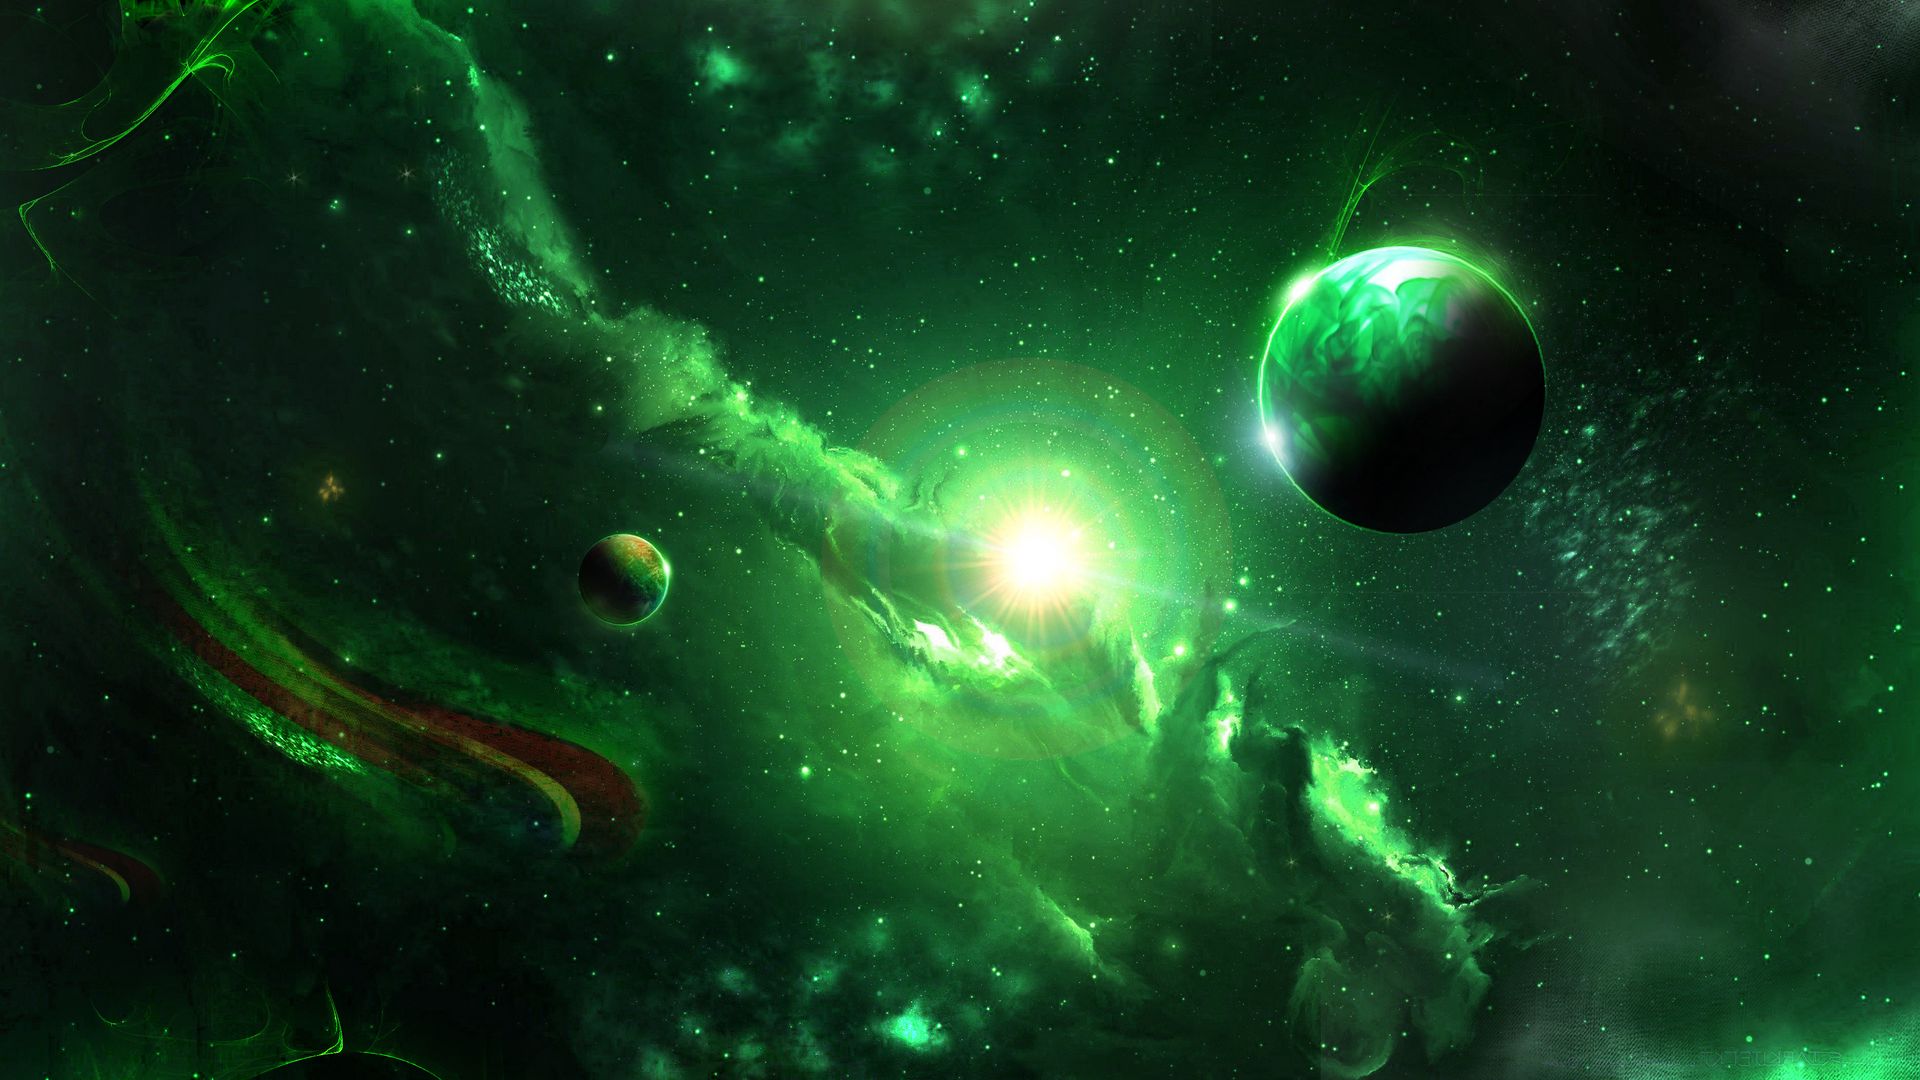 Download wallpaper 1920x1080 space, galaxy, planets, green, universe